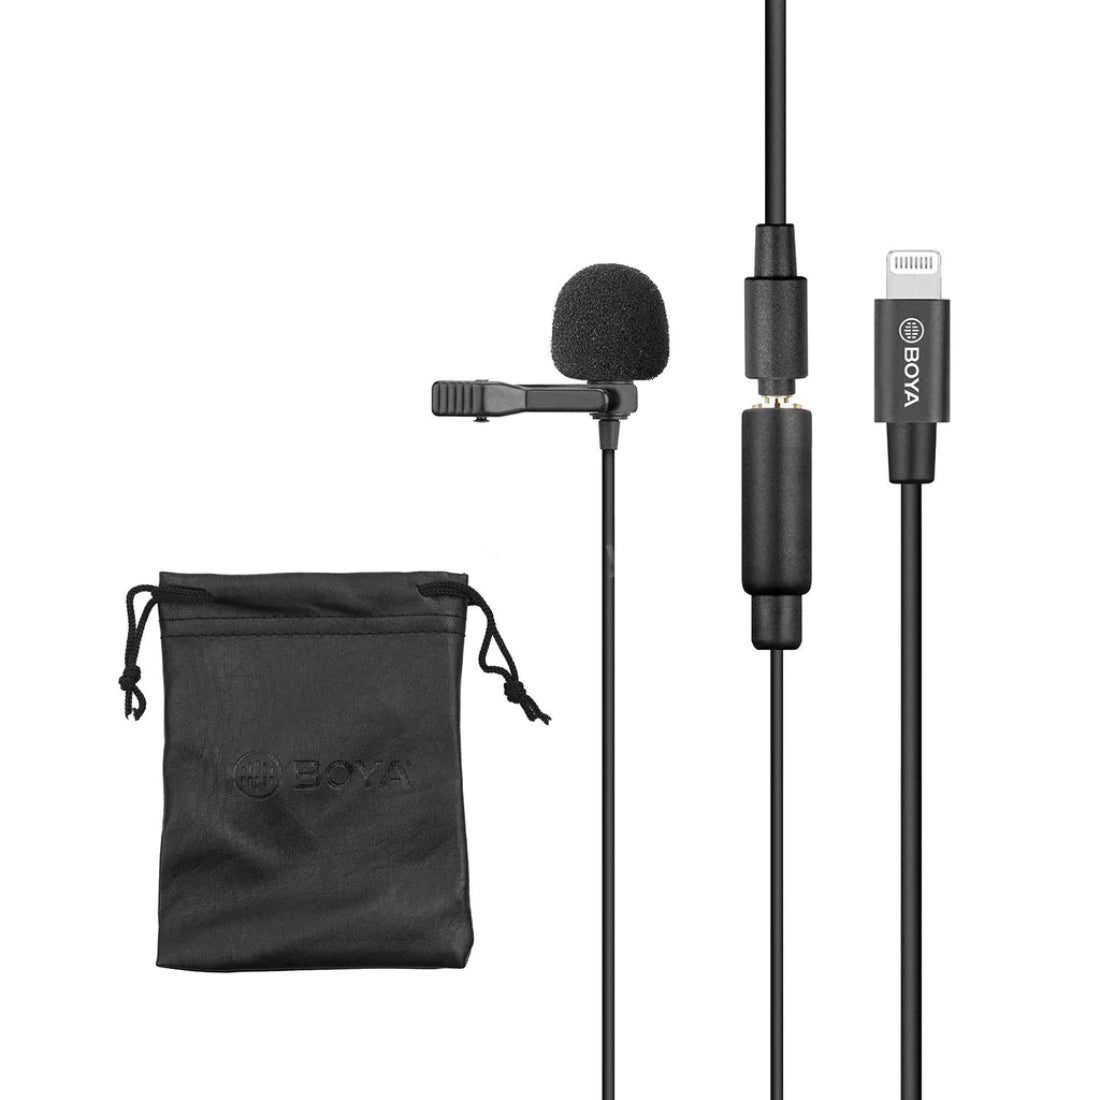 Boya BY-M2 Lavalier Microphone For iOS Devices - ميكروفون - Store 974 | ستور ٩٧٤